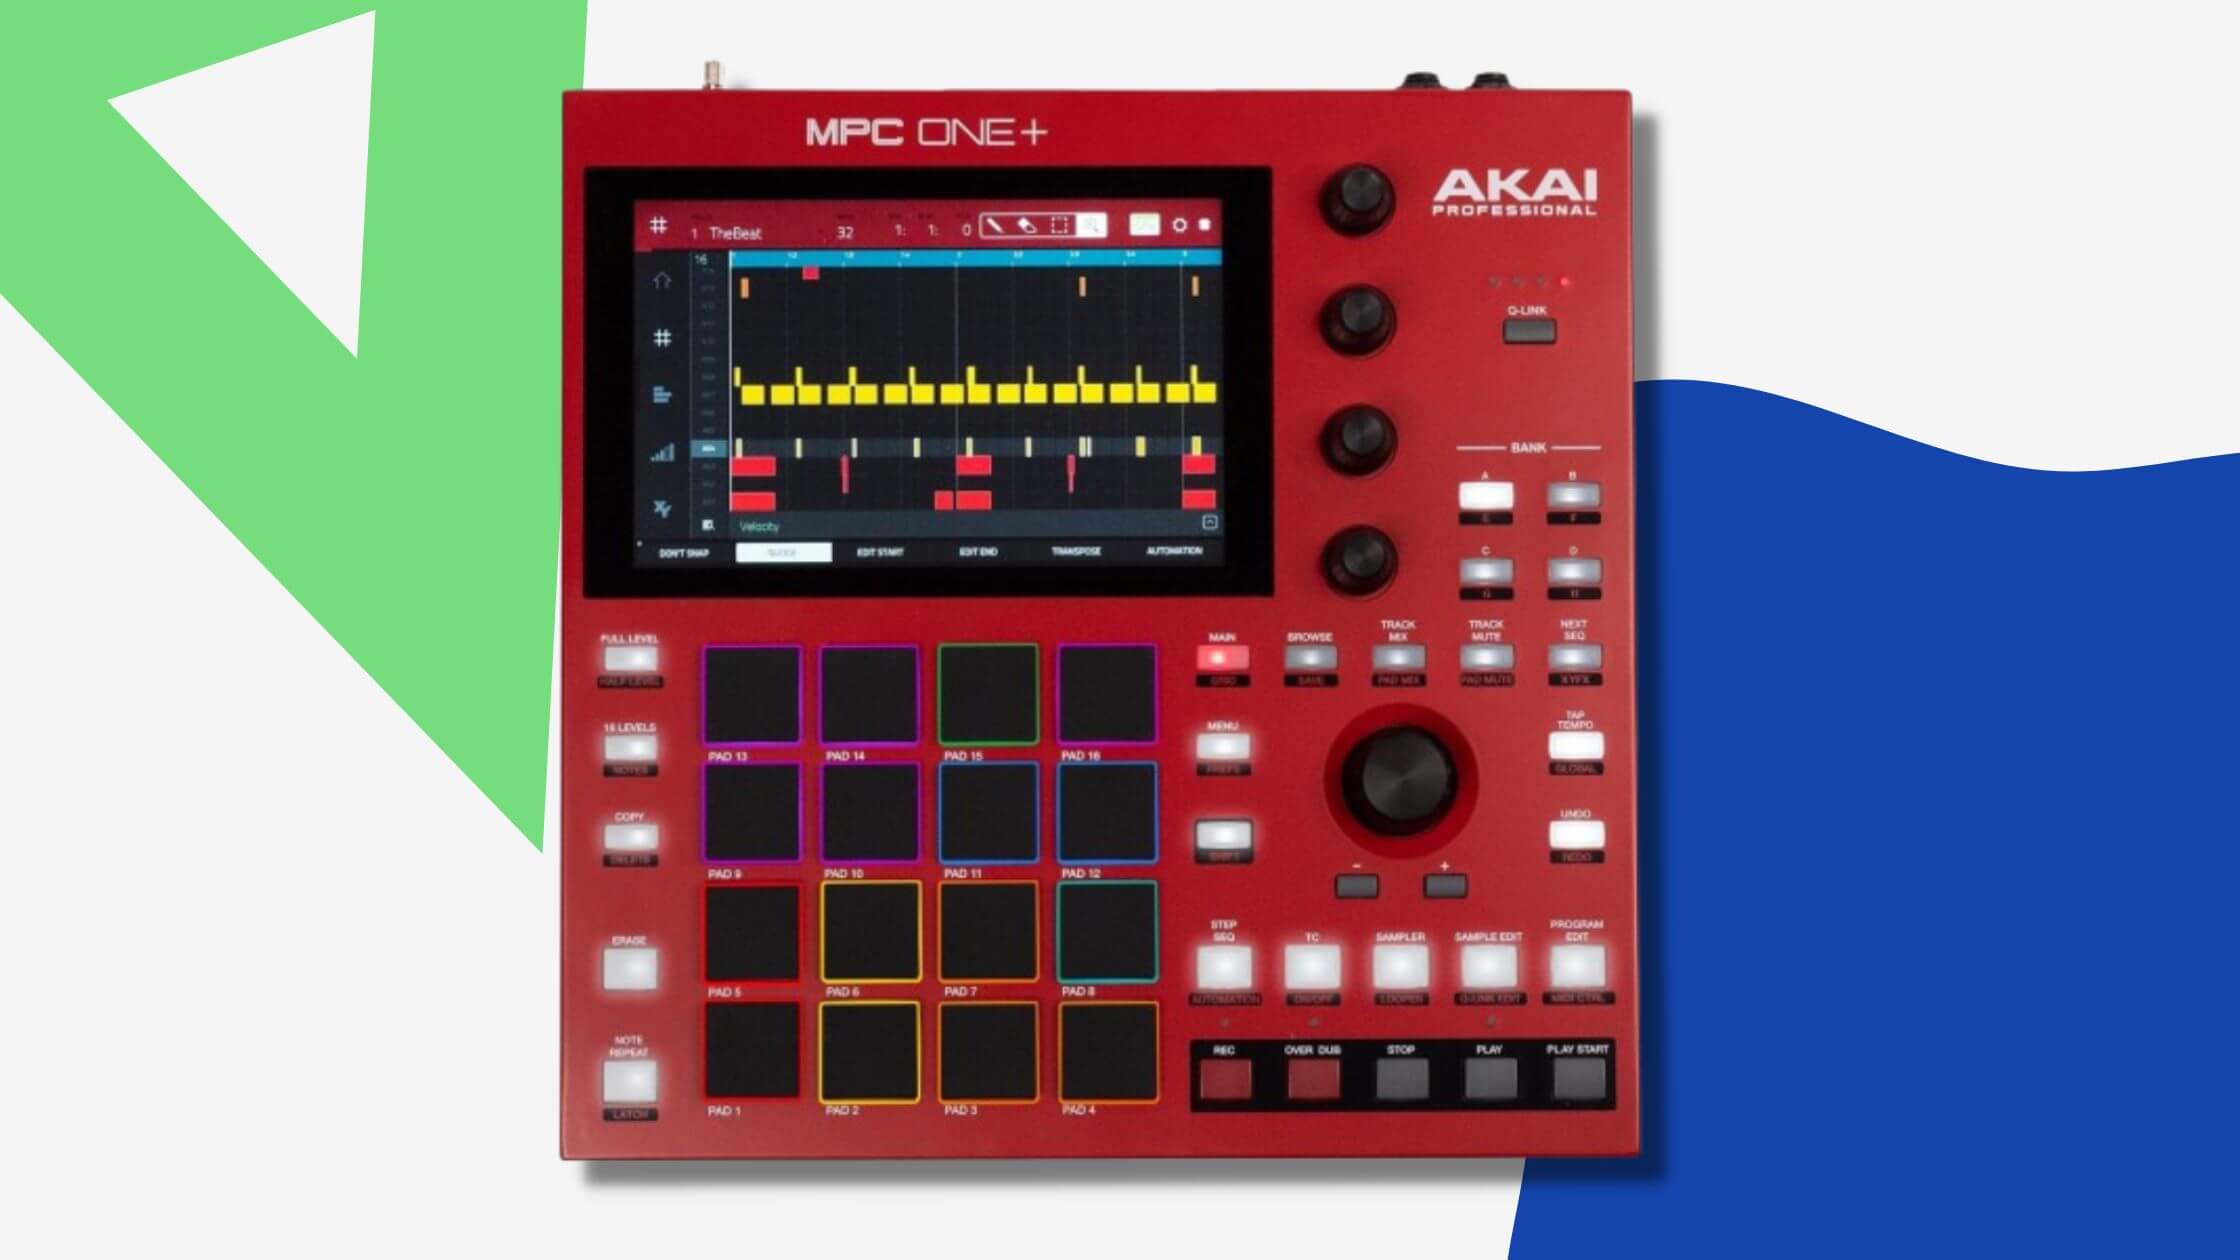 AKAI celebrates 35 years of MPC with MPC One + standalone sampler and sequencer